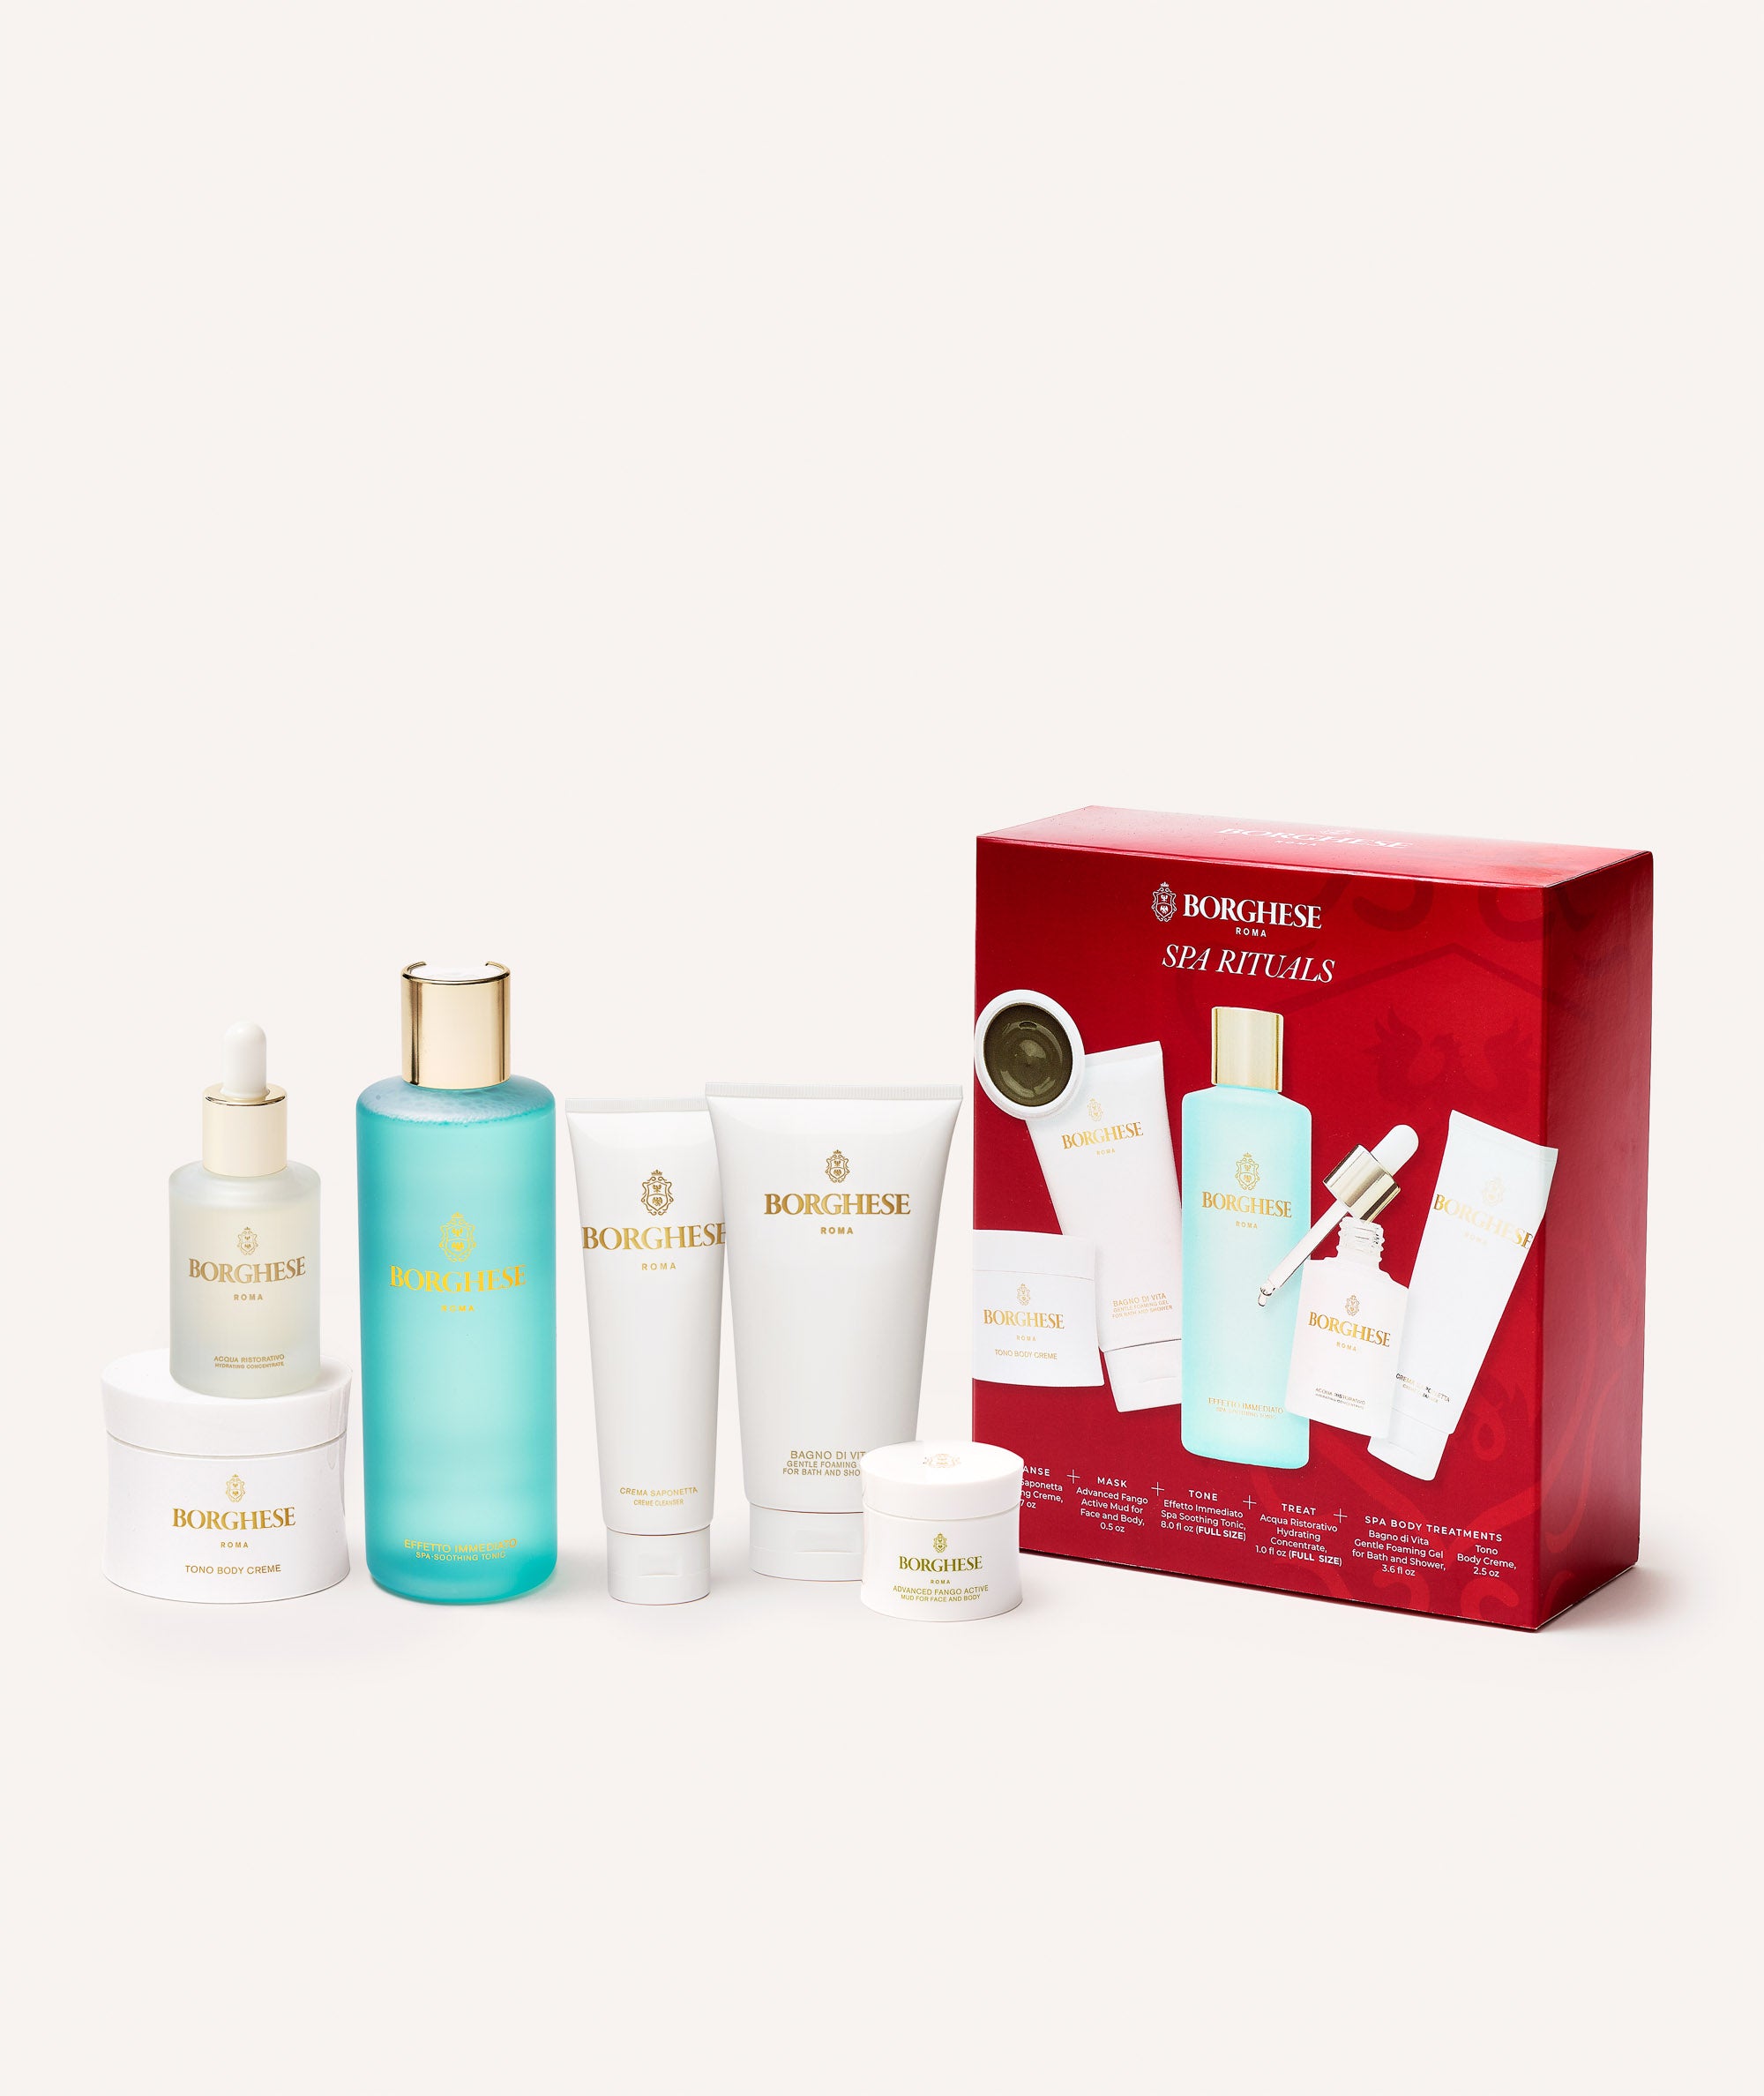 The Borghese 6-Piece Spa Rituals Gift Set contents and red gift box